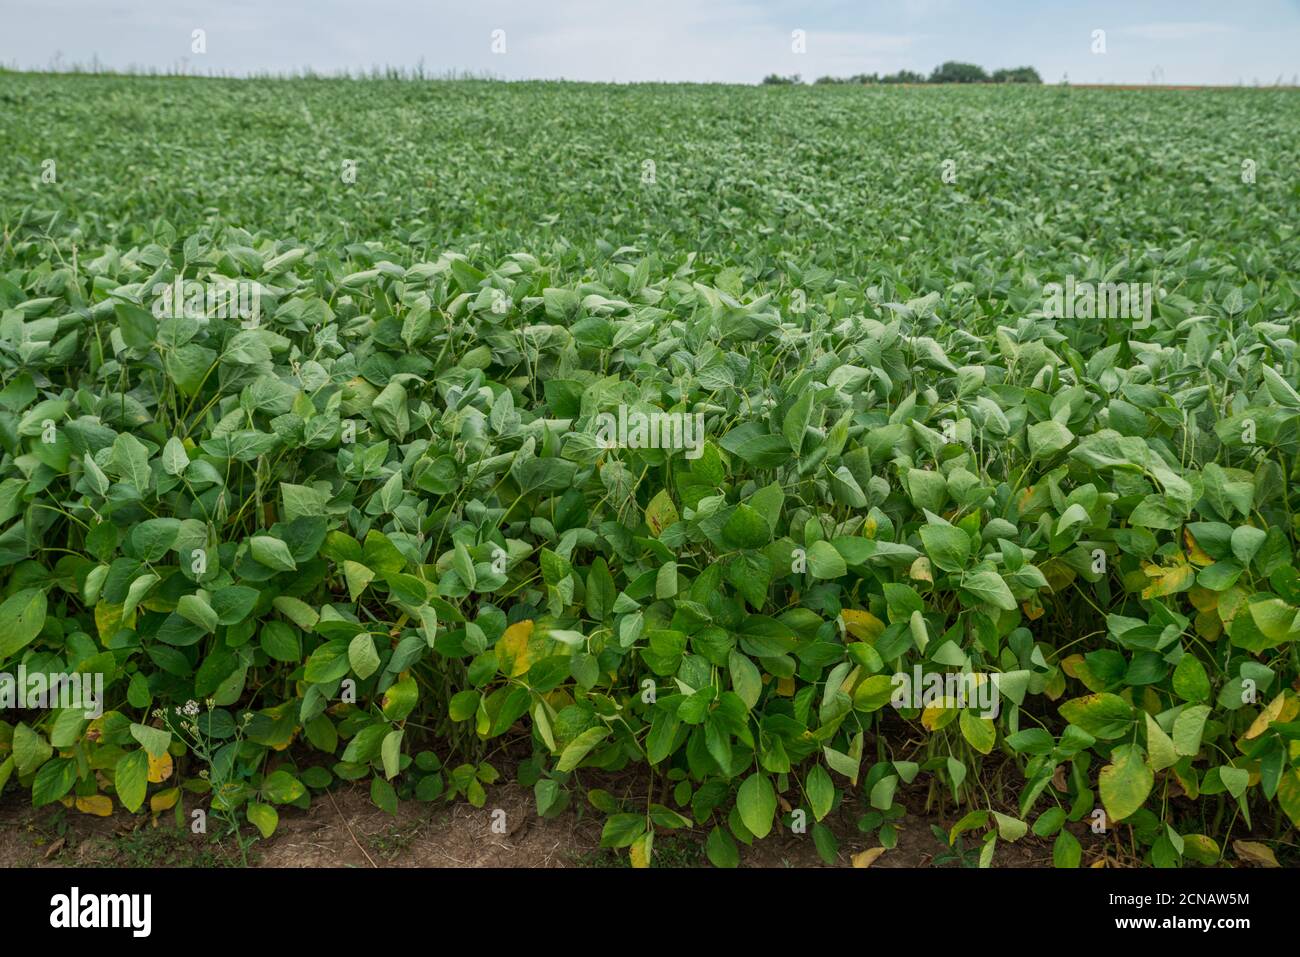 Agriculture field of bean plant. Green stalks close up. Stock Photo